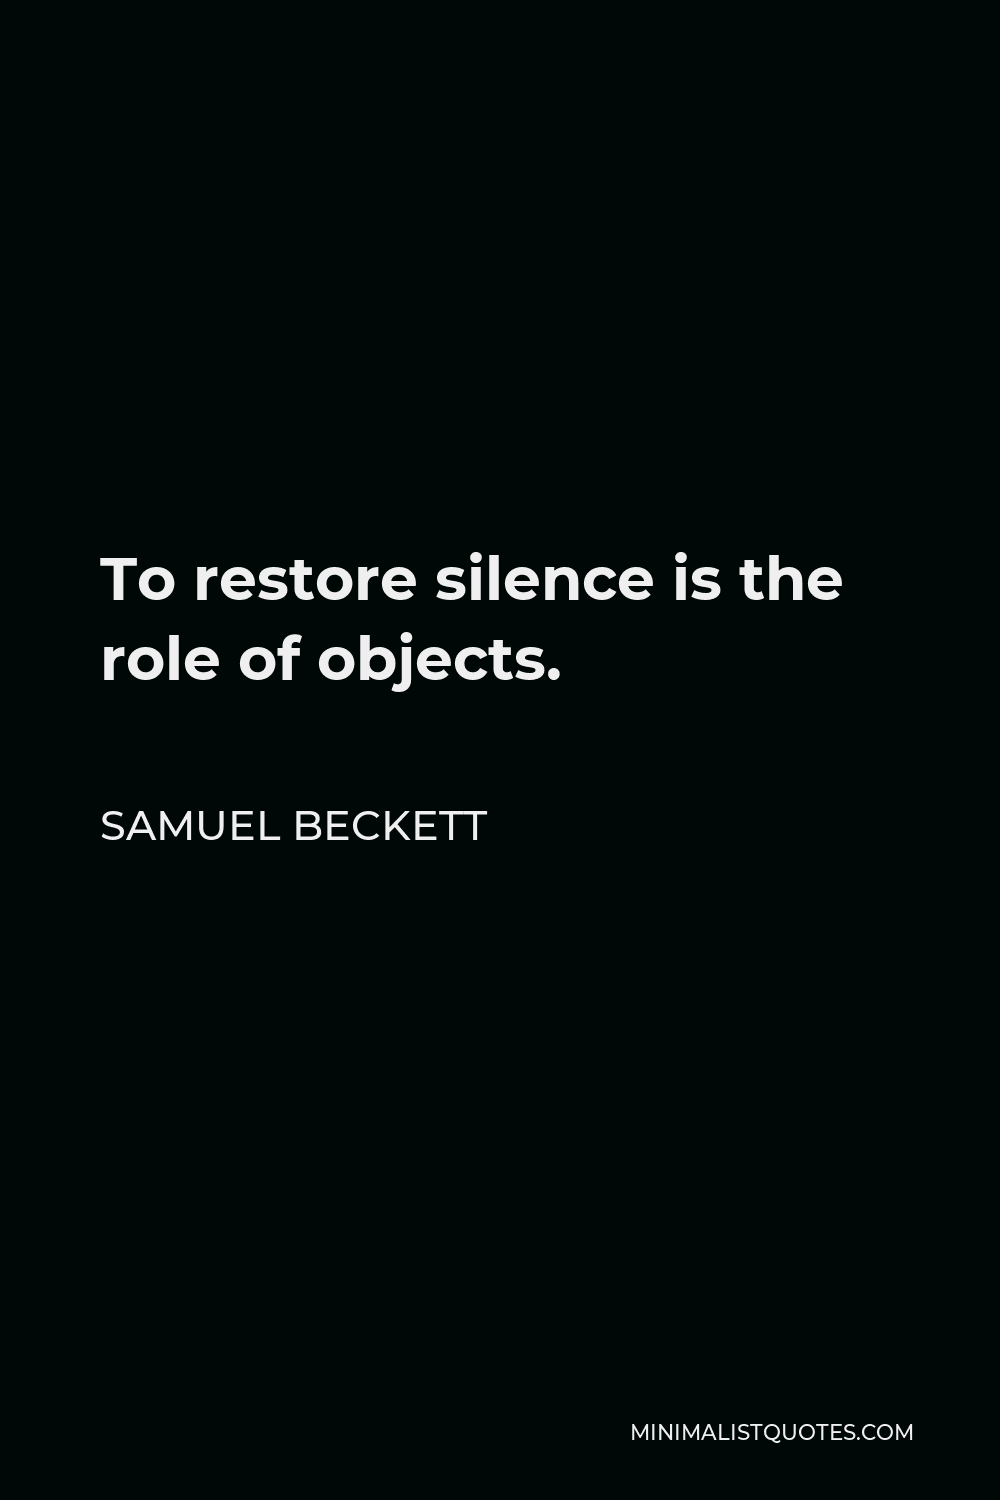 Samuel Beckett Quote - To restore silence is the role of objects.